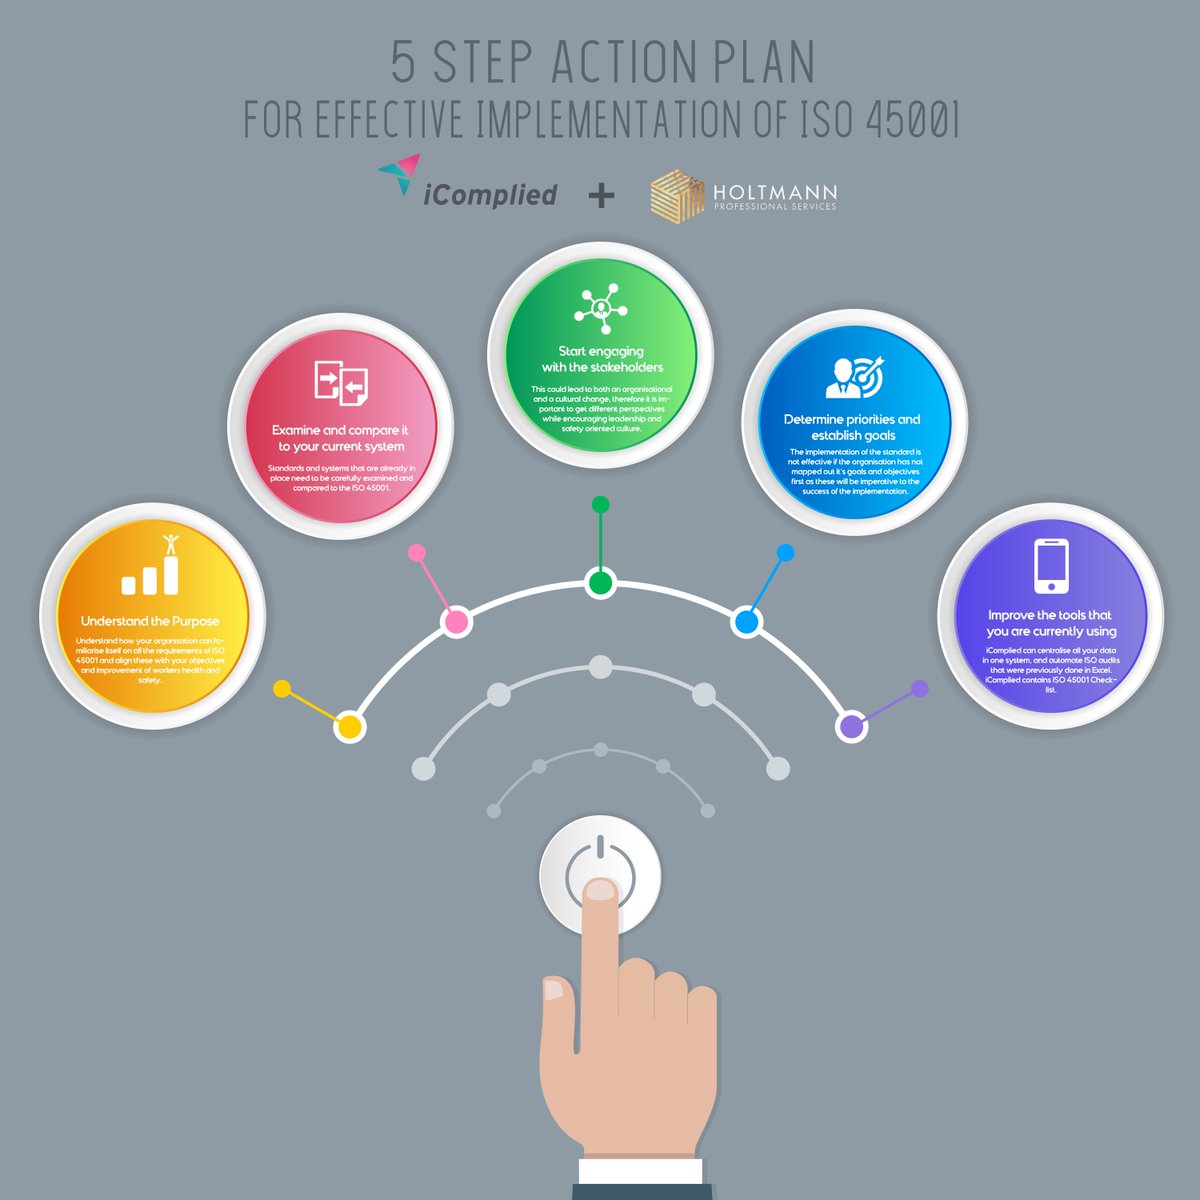 Key Steps in Implementation of ISO 45001
To find out more go to buff.ly/2uaidU6
#iso45001 #Audit #compliance